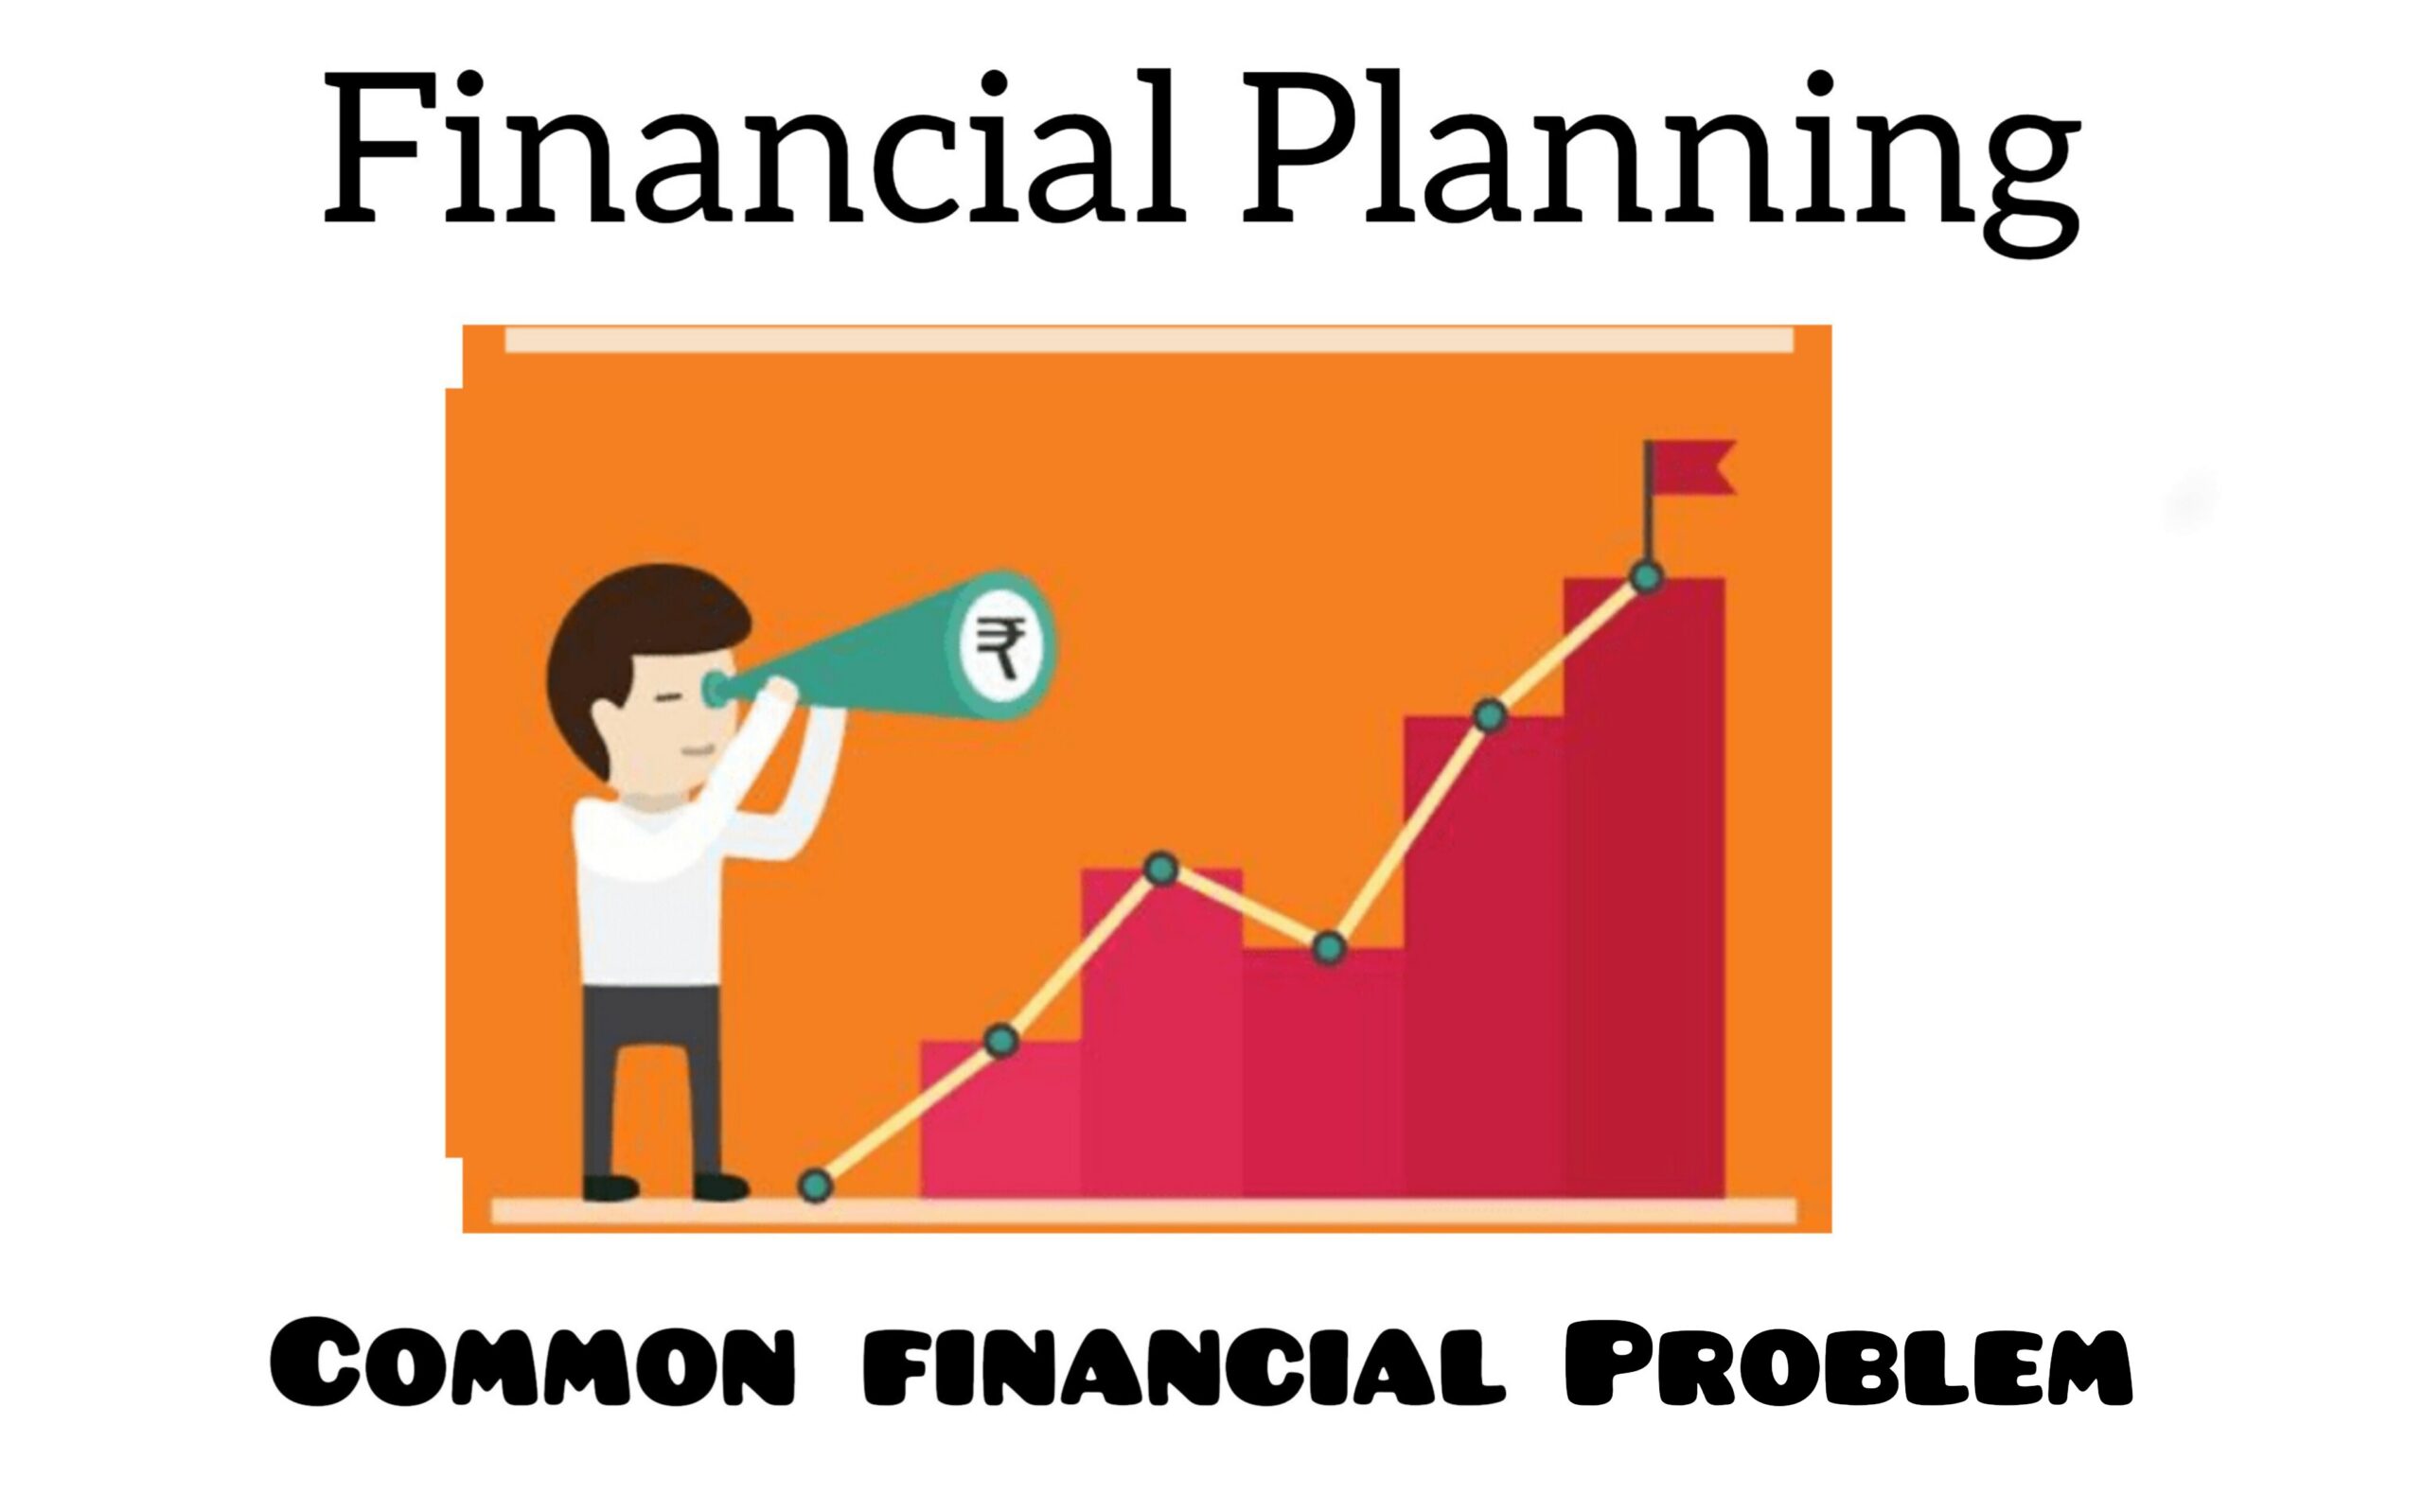 Financial Planning common financial problems